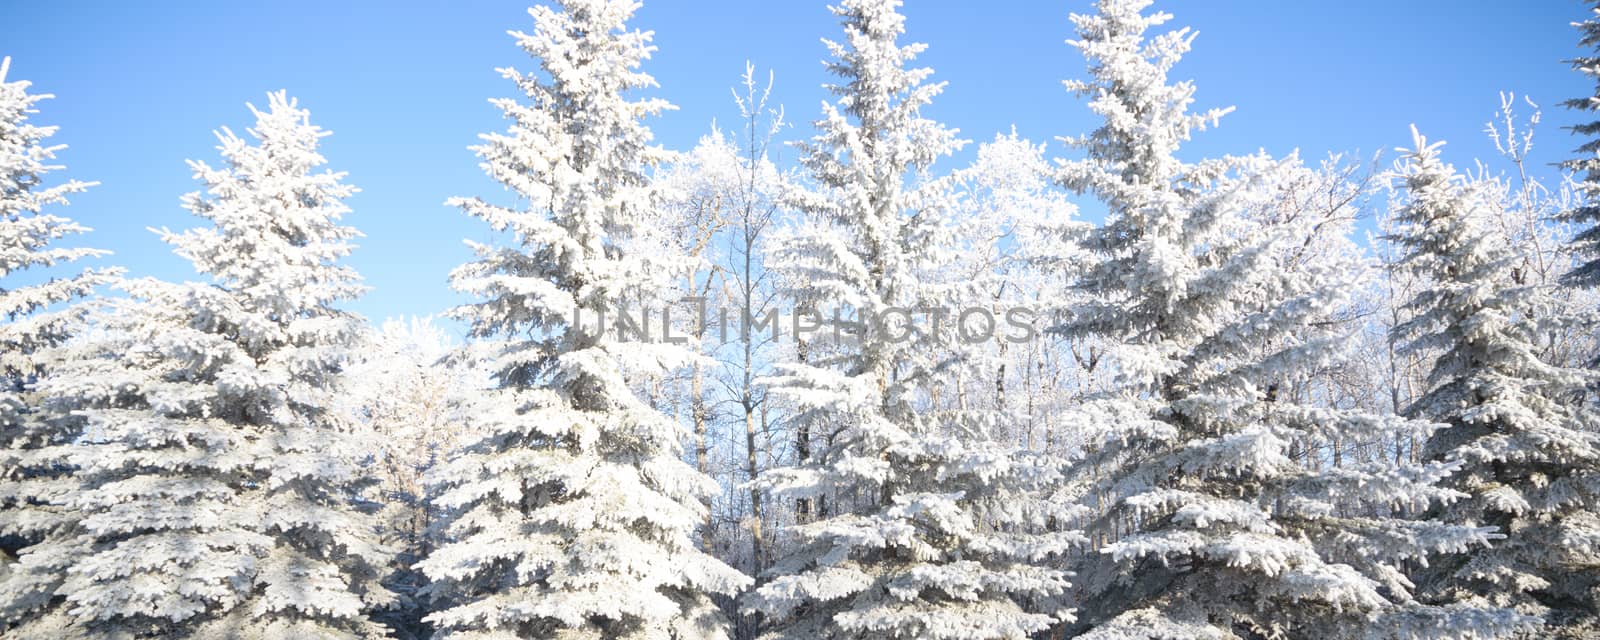 Sunlight in the frozen forest, nature series